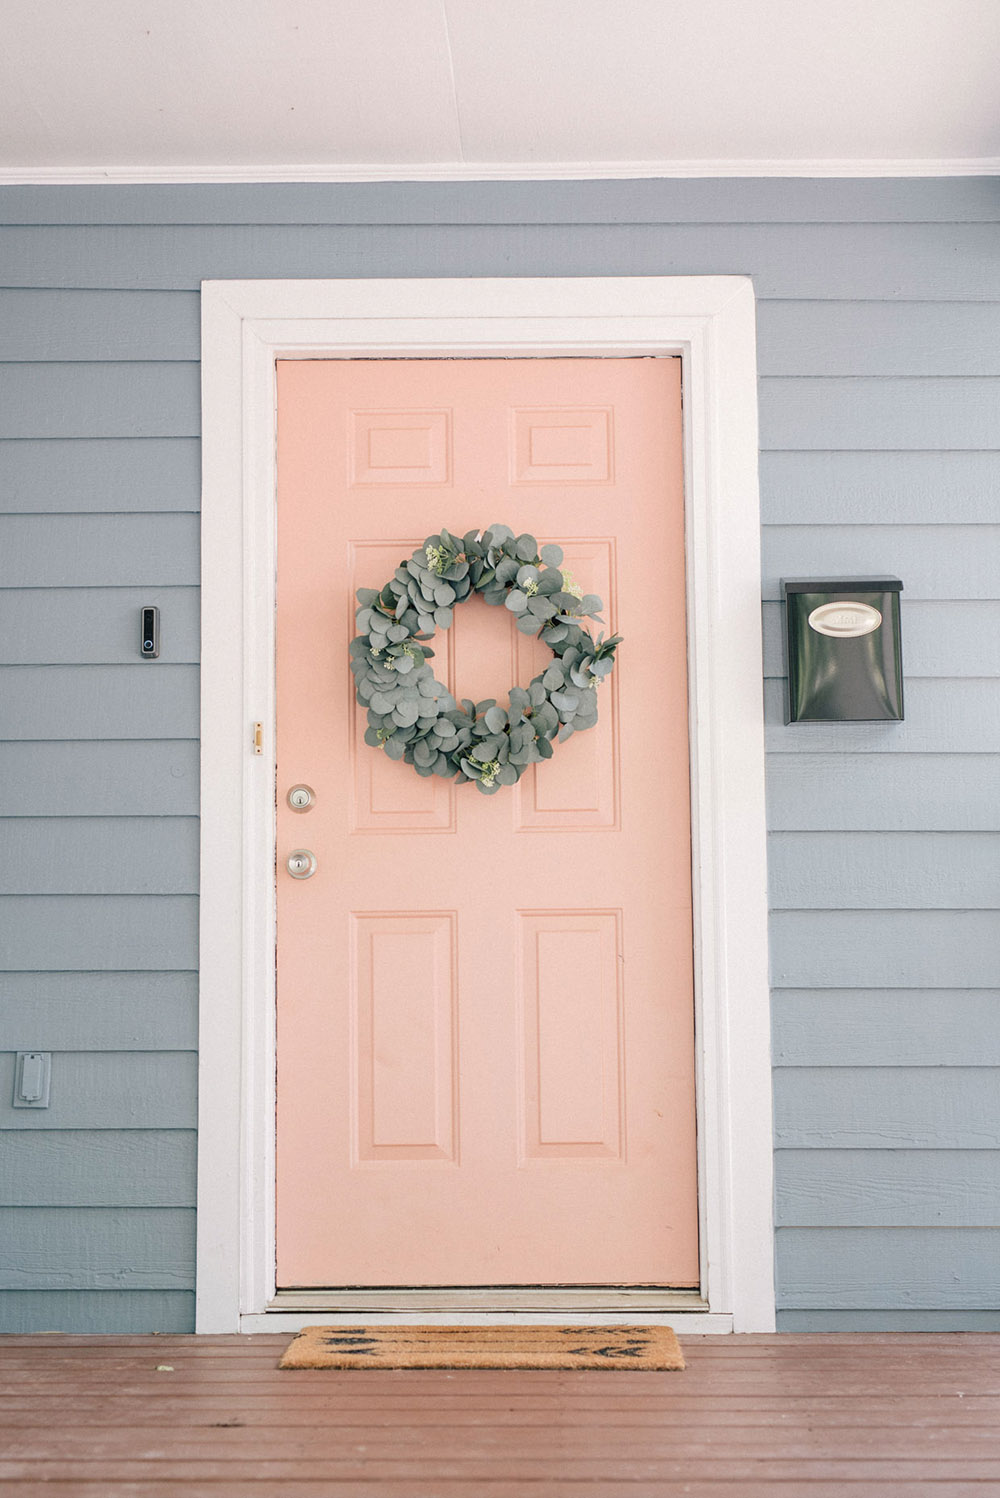 A pink door with white trim on a blue painted home.